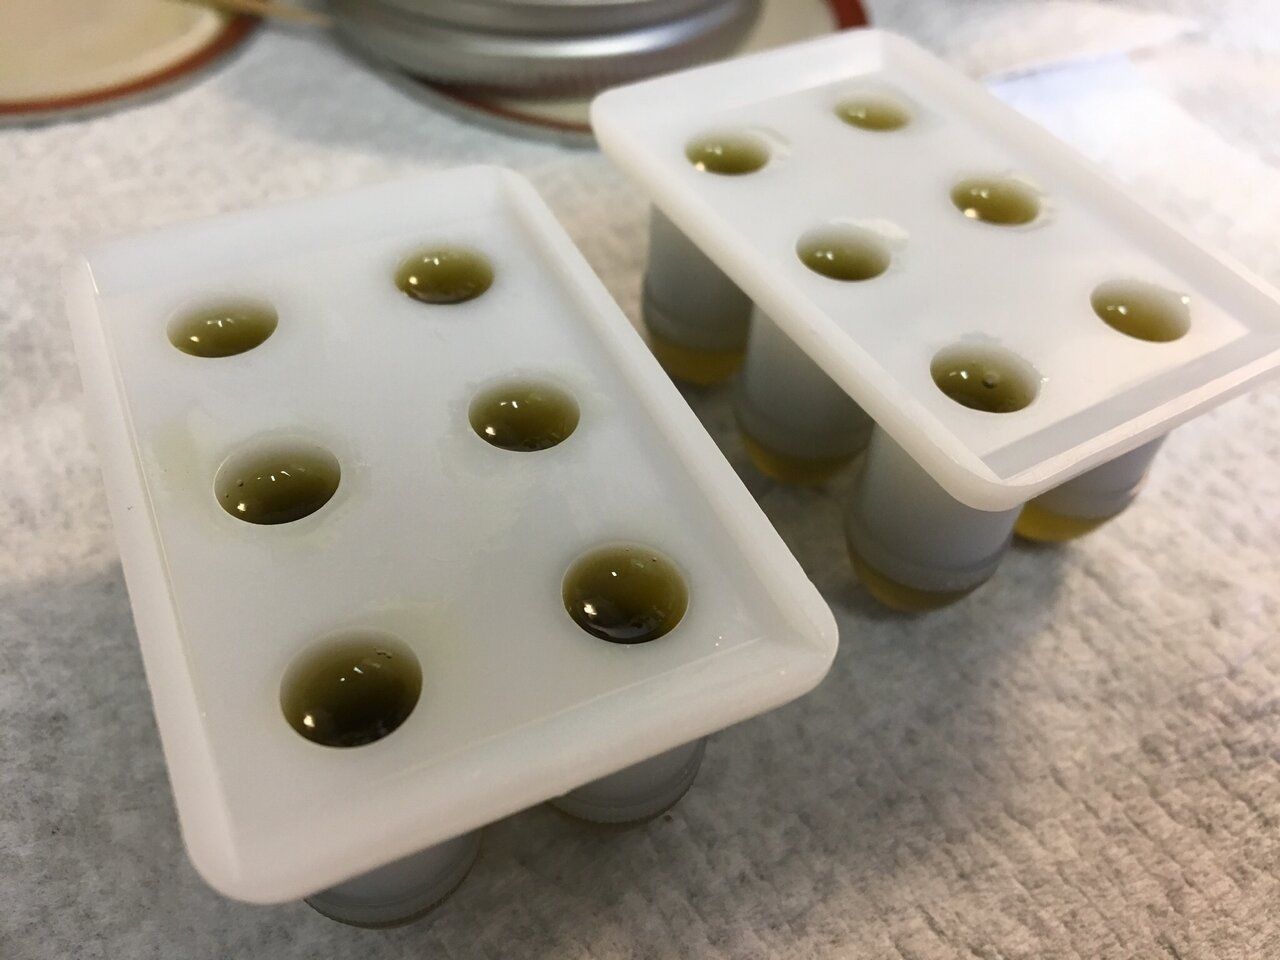 Making cannabis suppositories